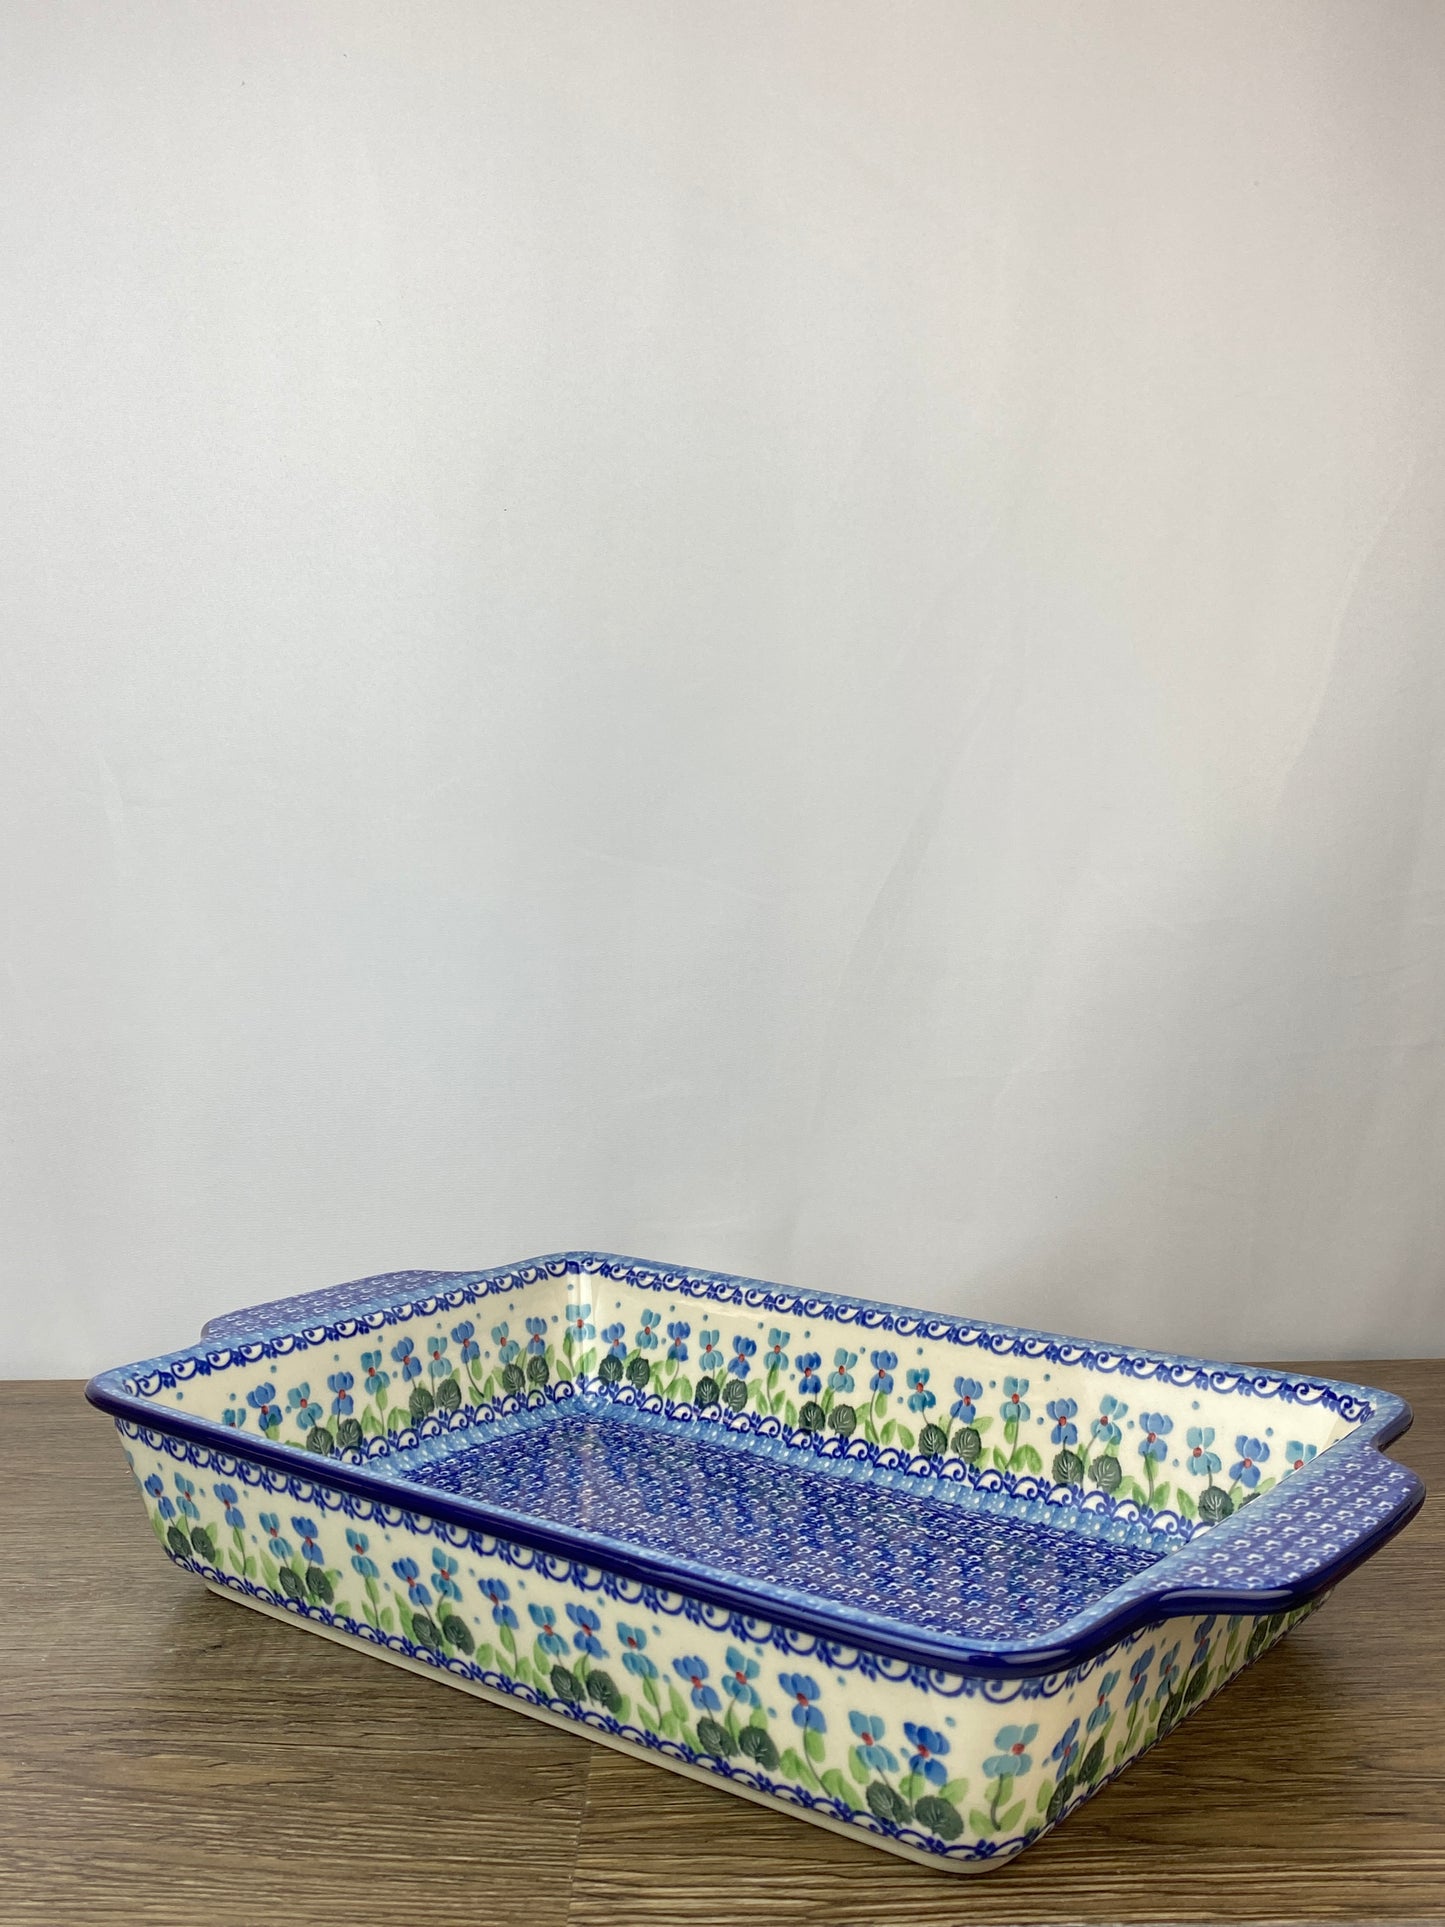 Large Rectangular Baker with Handles - Shape A56 - Pattern 2668